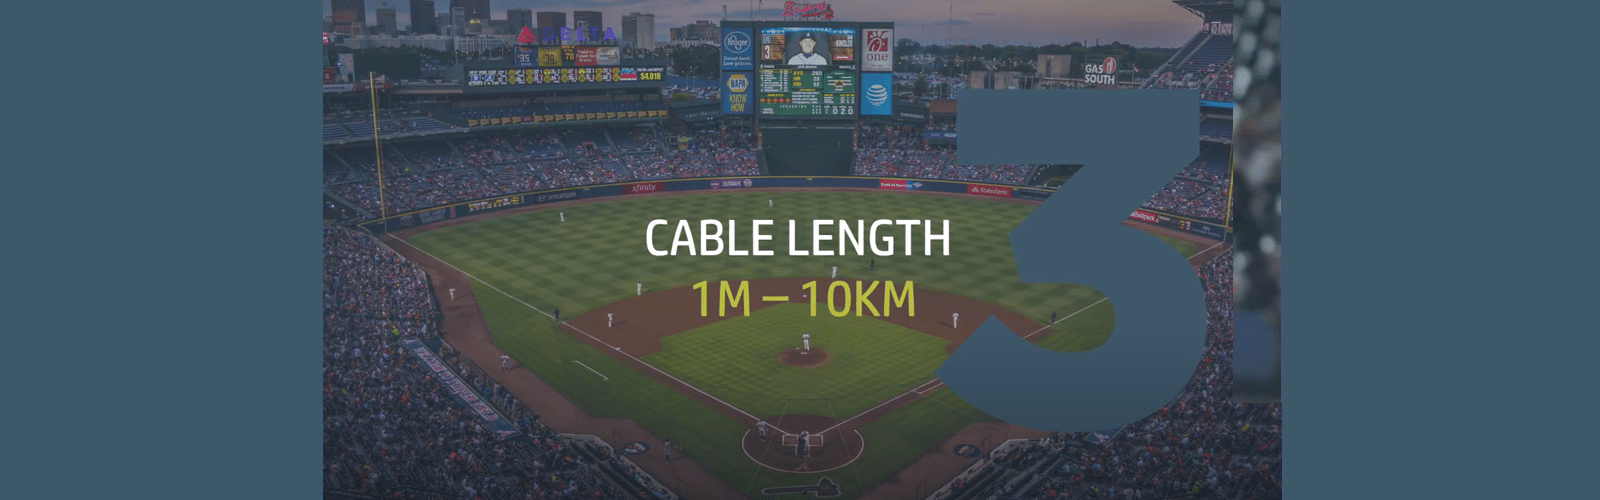 Cable length from 1m to 10km